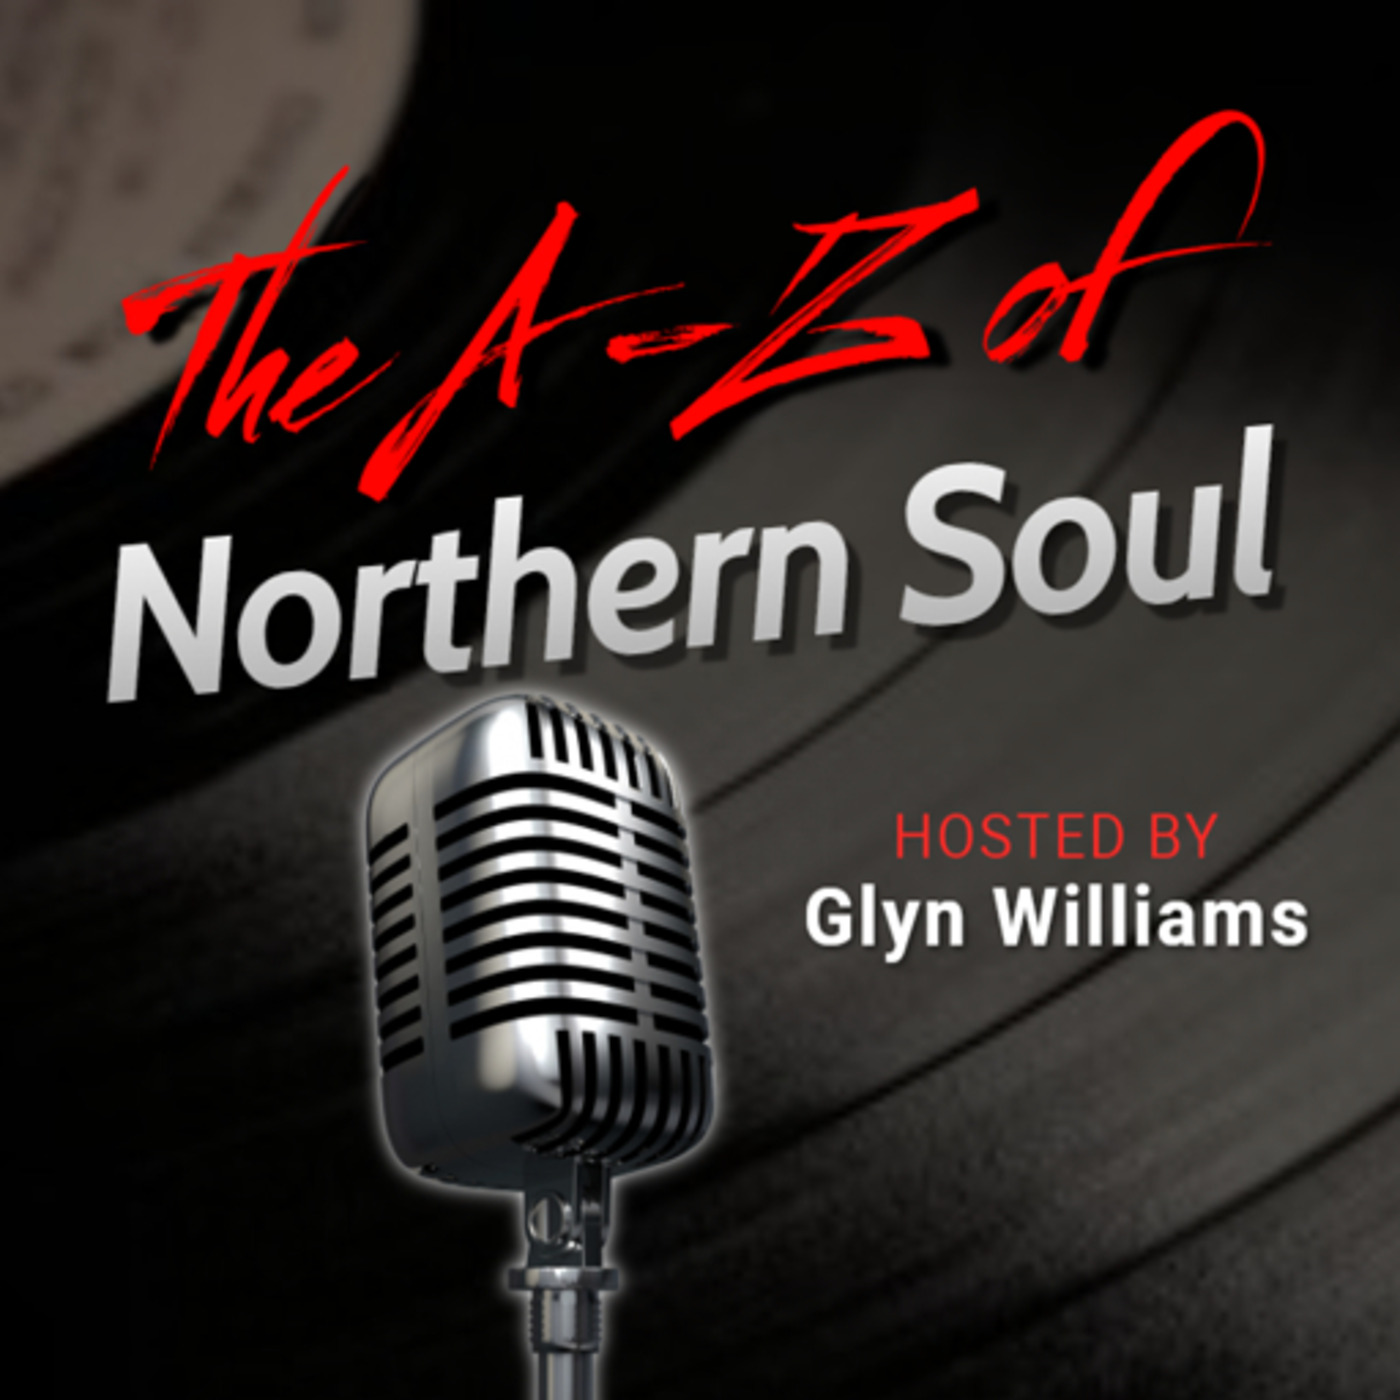 The A-Z of Northern Soul E020